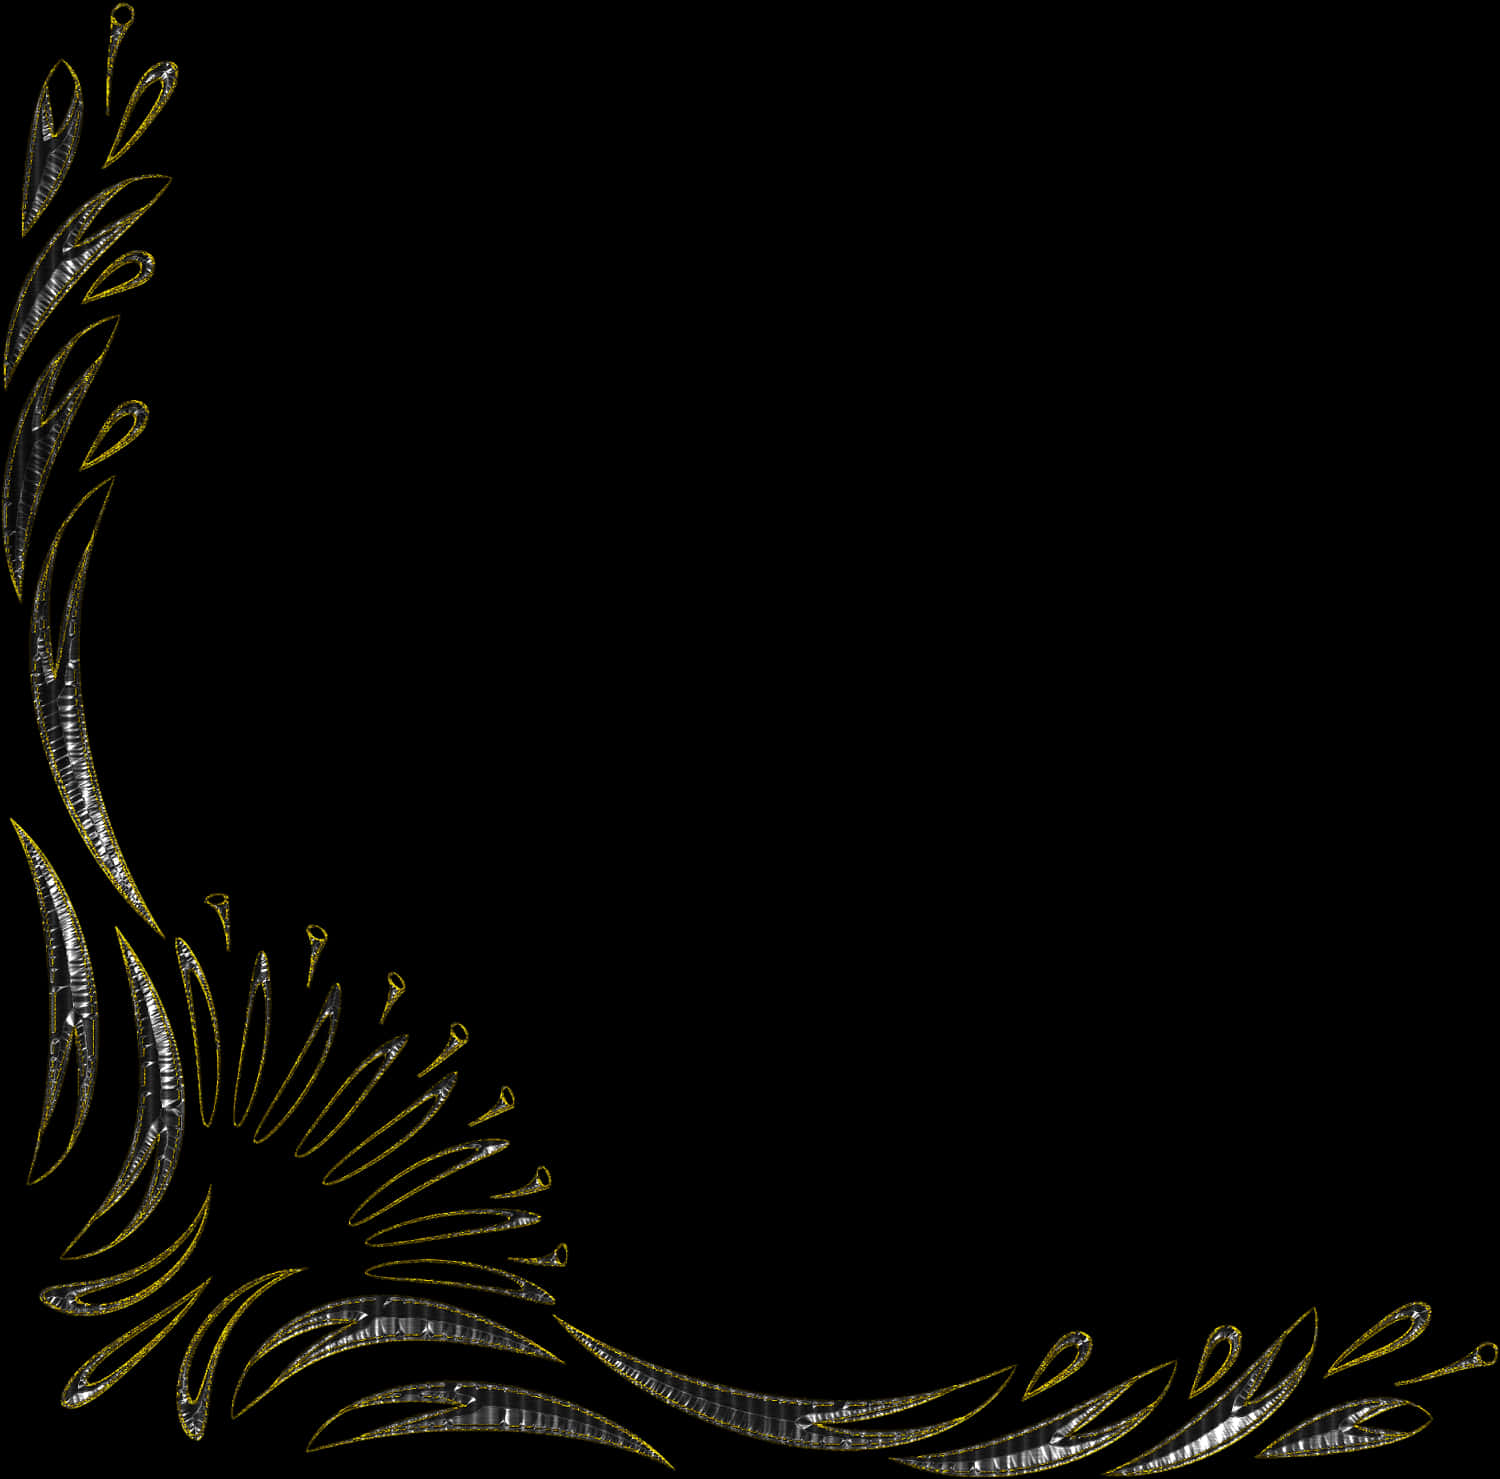 A Gold And Silver Design On A Black Background